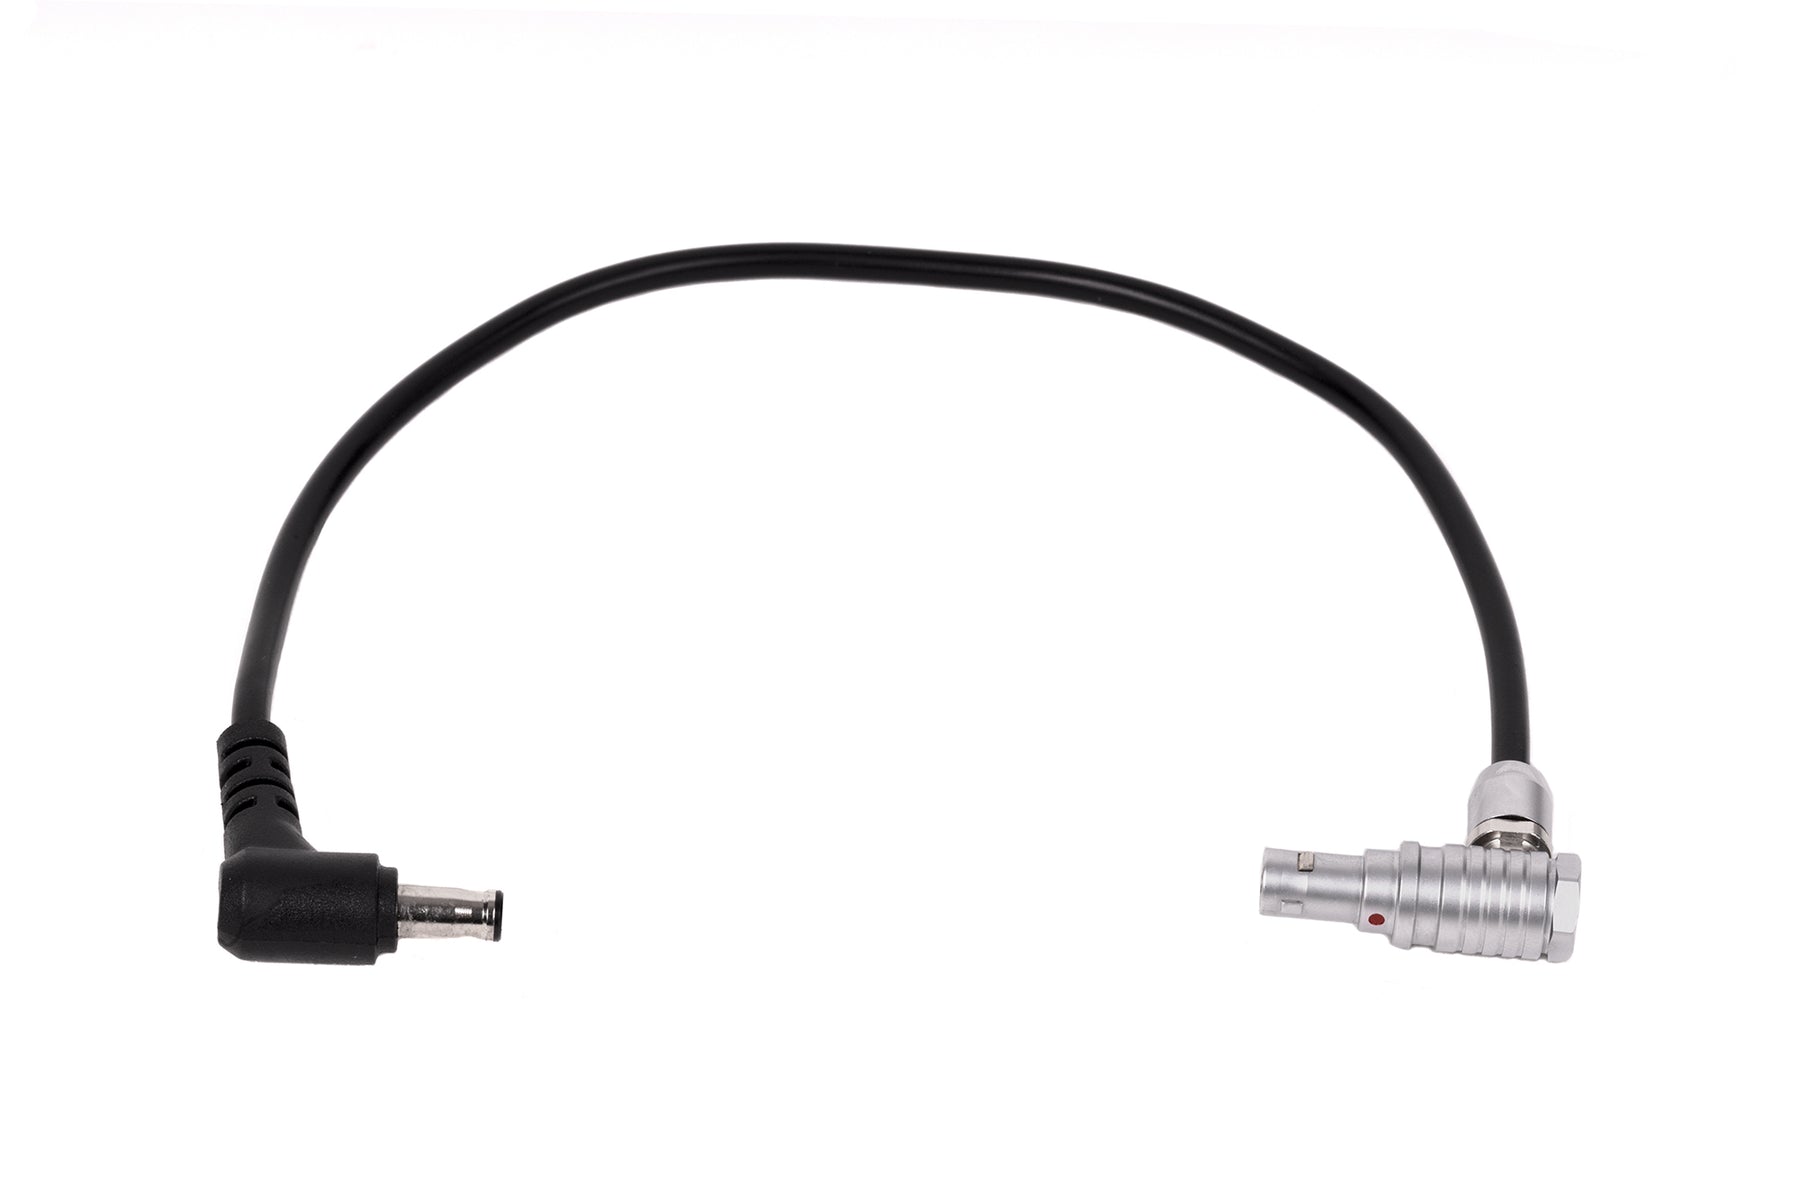 3-Pin 0B to Barrel Battery Slide Pro Replacement Power Cable (10")